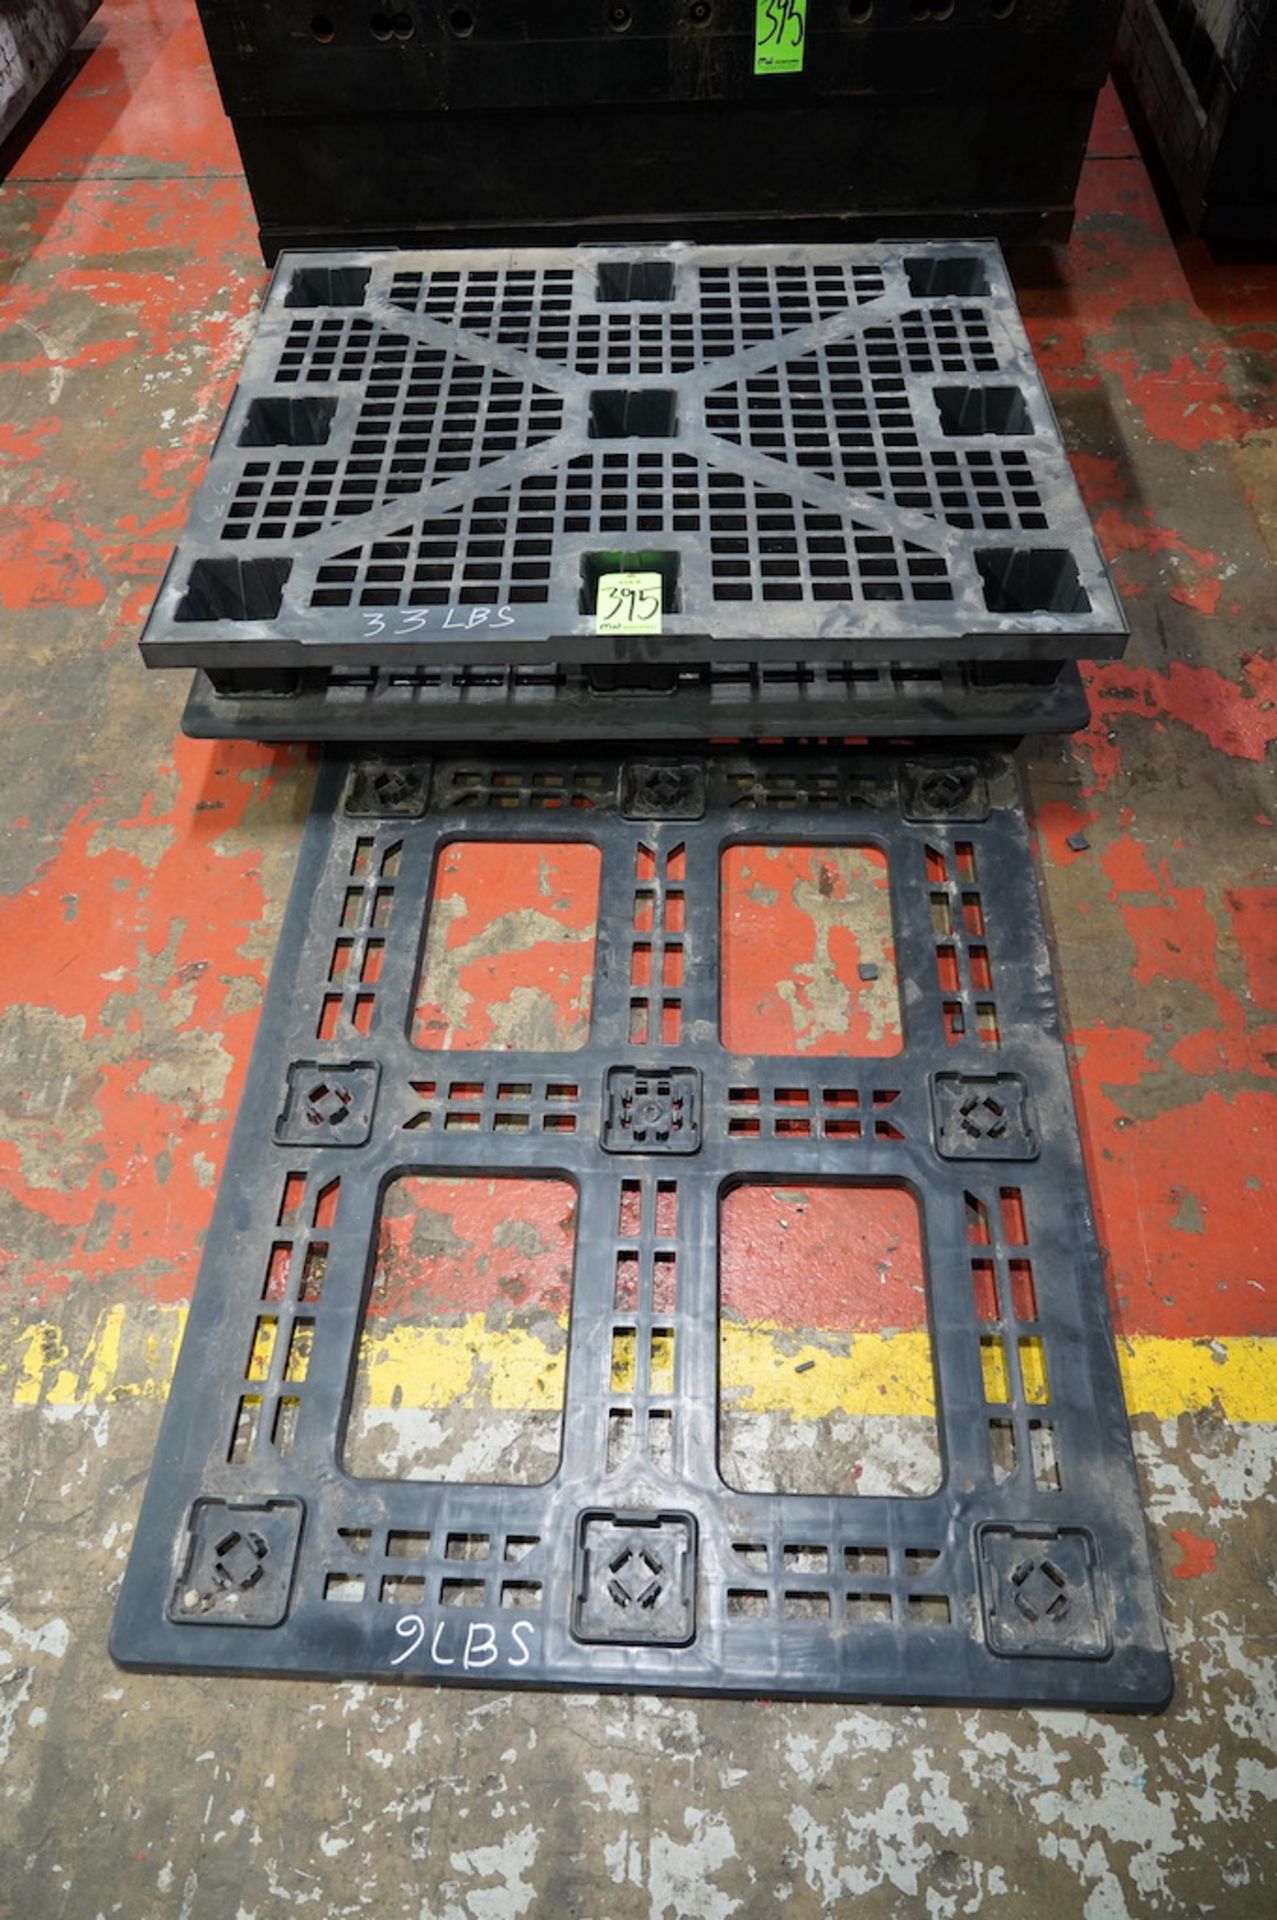 40" x 48" Plastic Pallet Mold w/(2) Molds - (1) For 40" x 48" Pallet, (1) For Snap-In Piece to make - Image 6 of 7